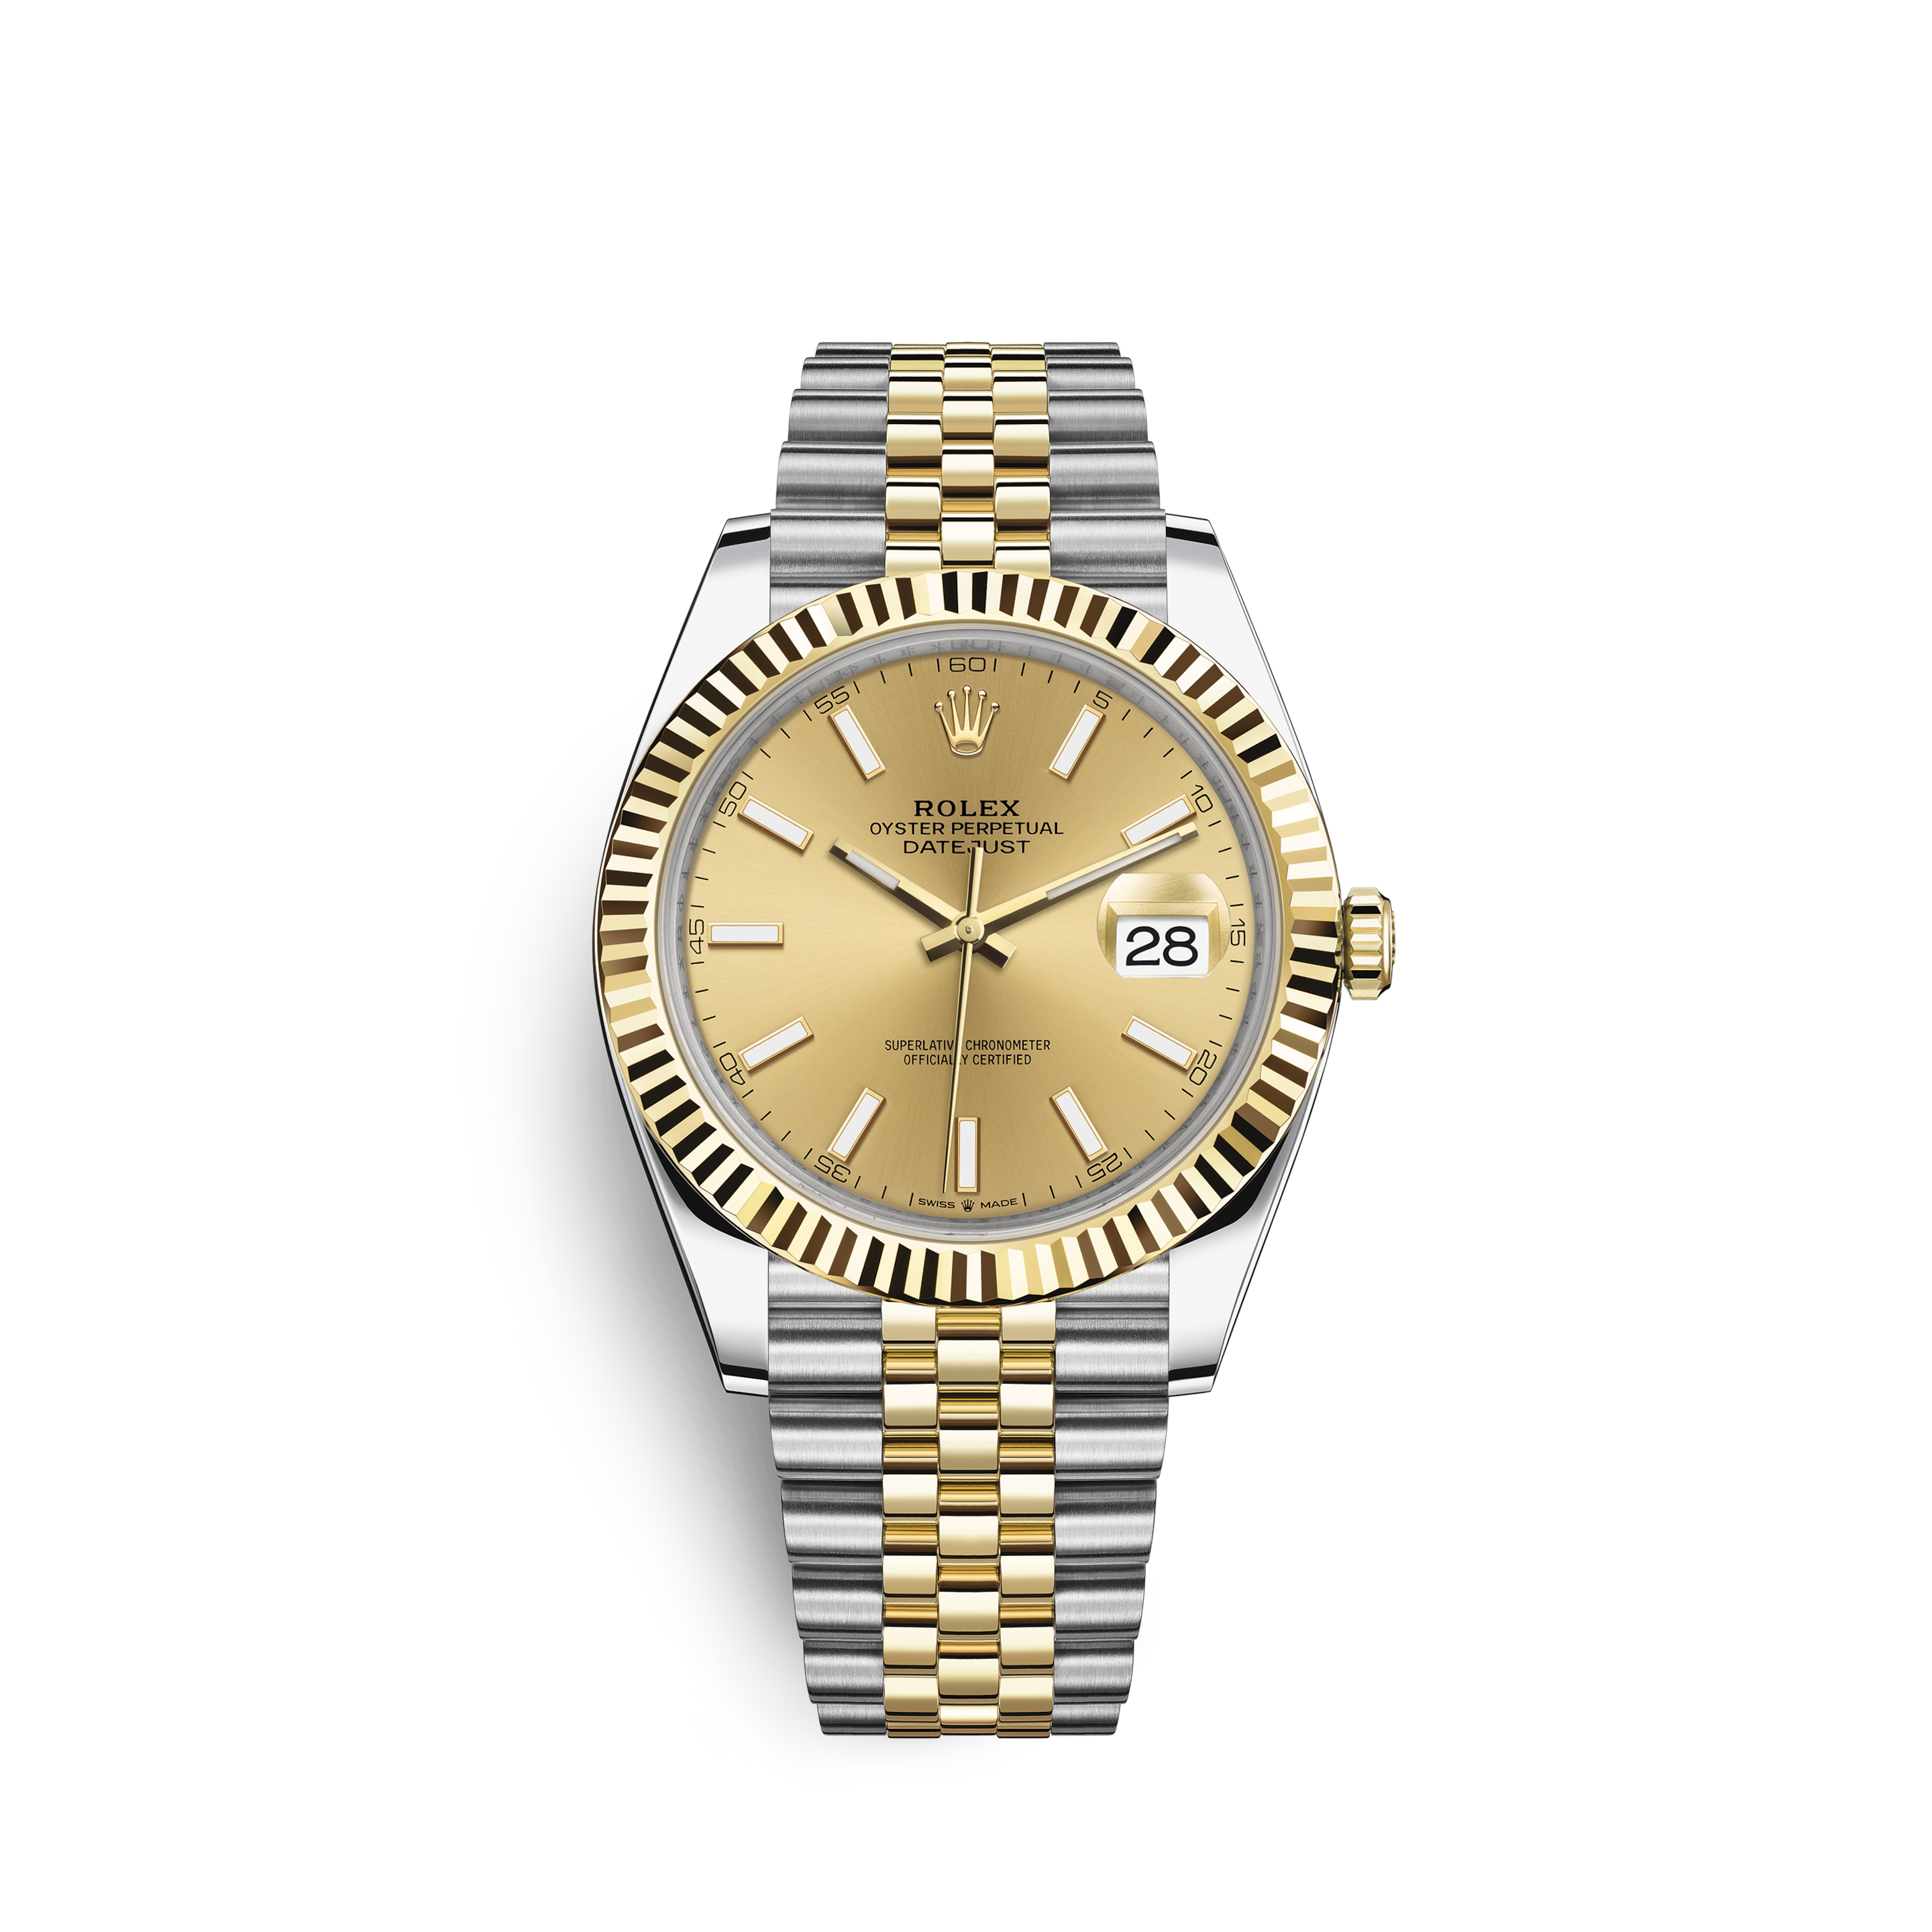 Rolex Datejust - The Classic Watch of 